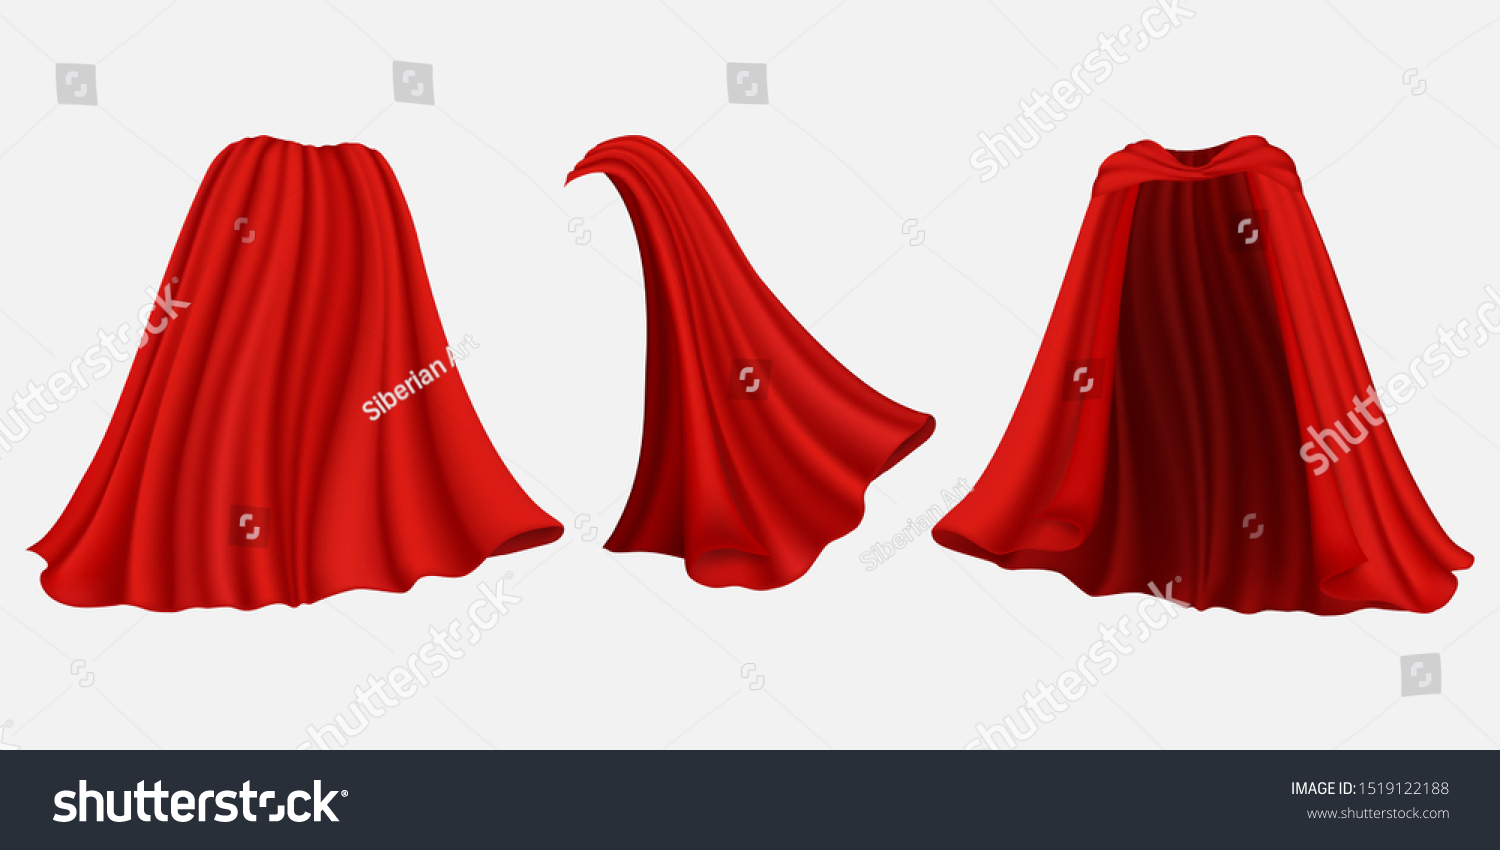 Superhero red silk cape, cloak, mantle, front back and side view, vector illustration isolated on white background. Carnival clothes, masquerade costume etc. #1519122188